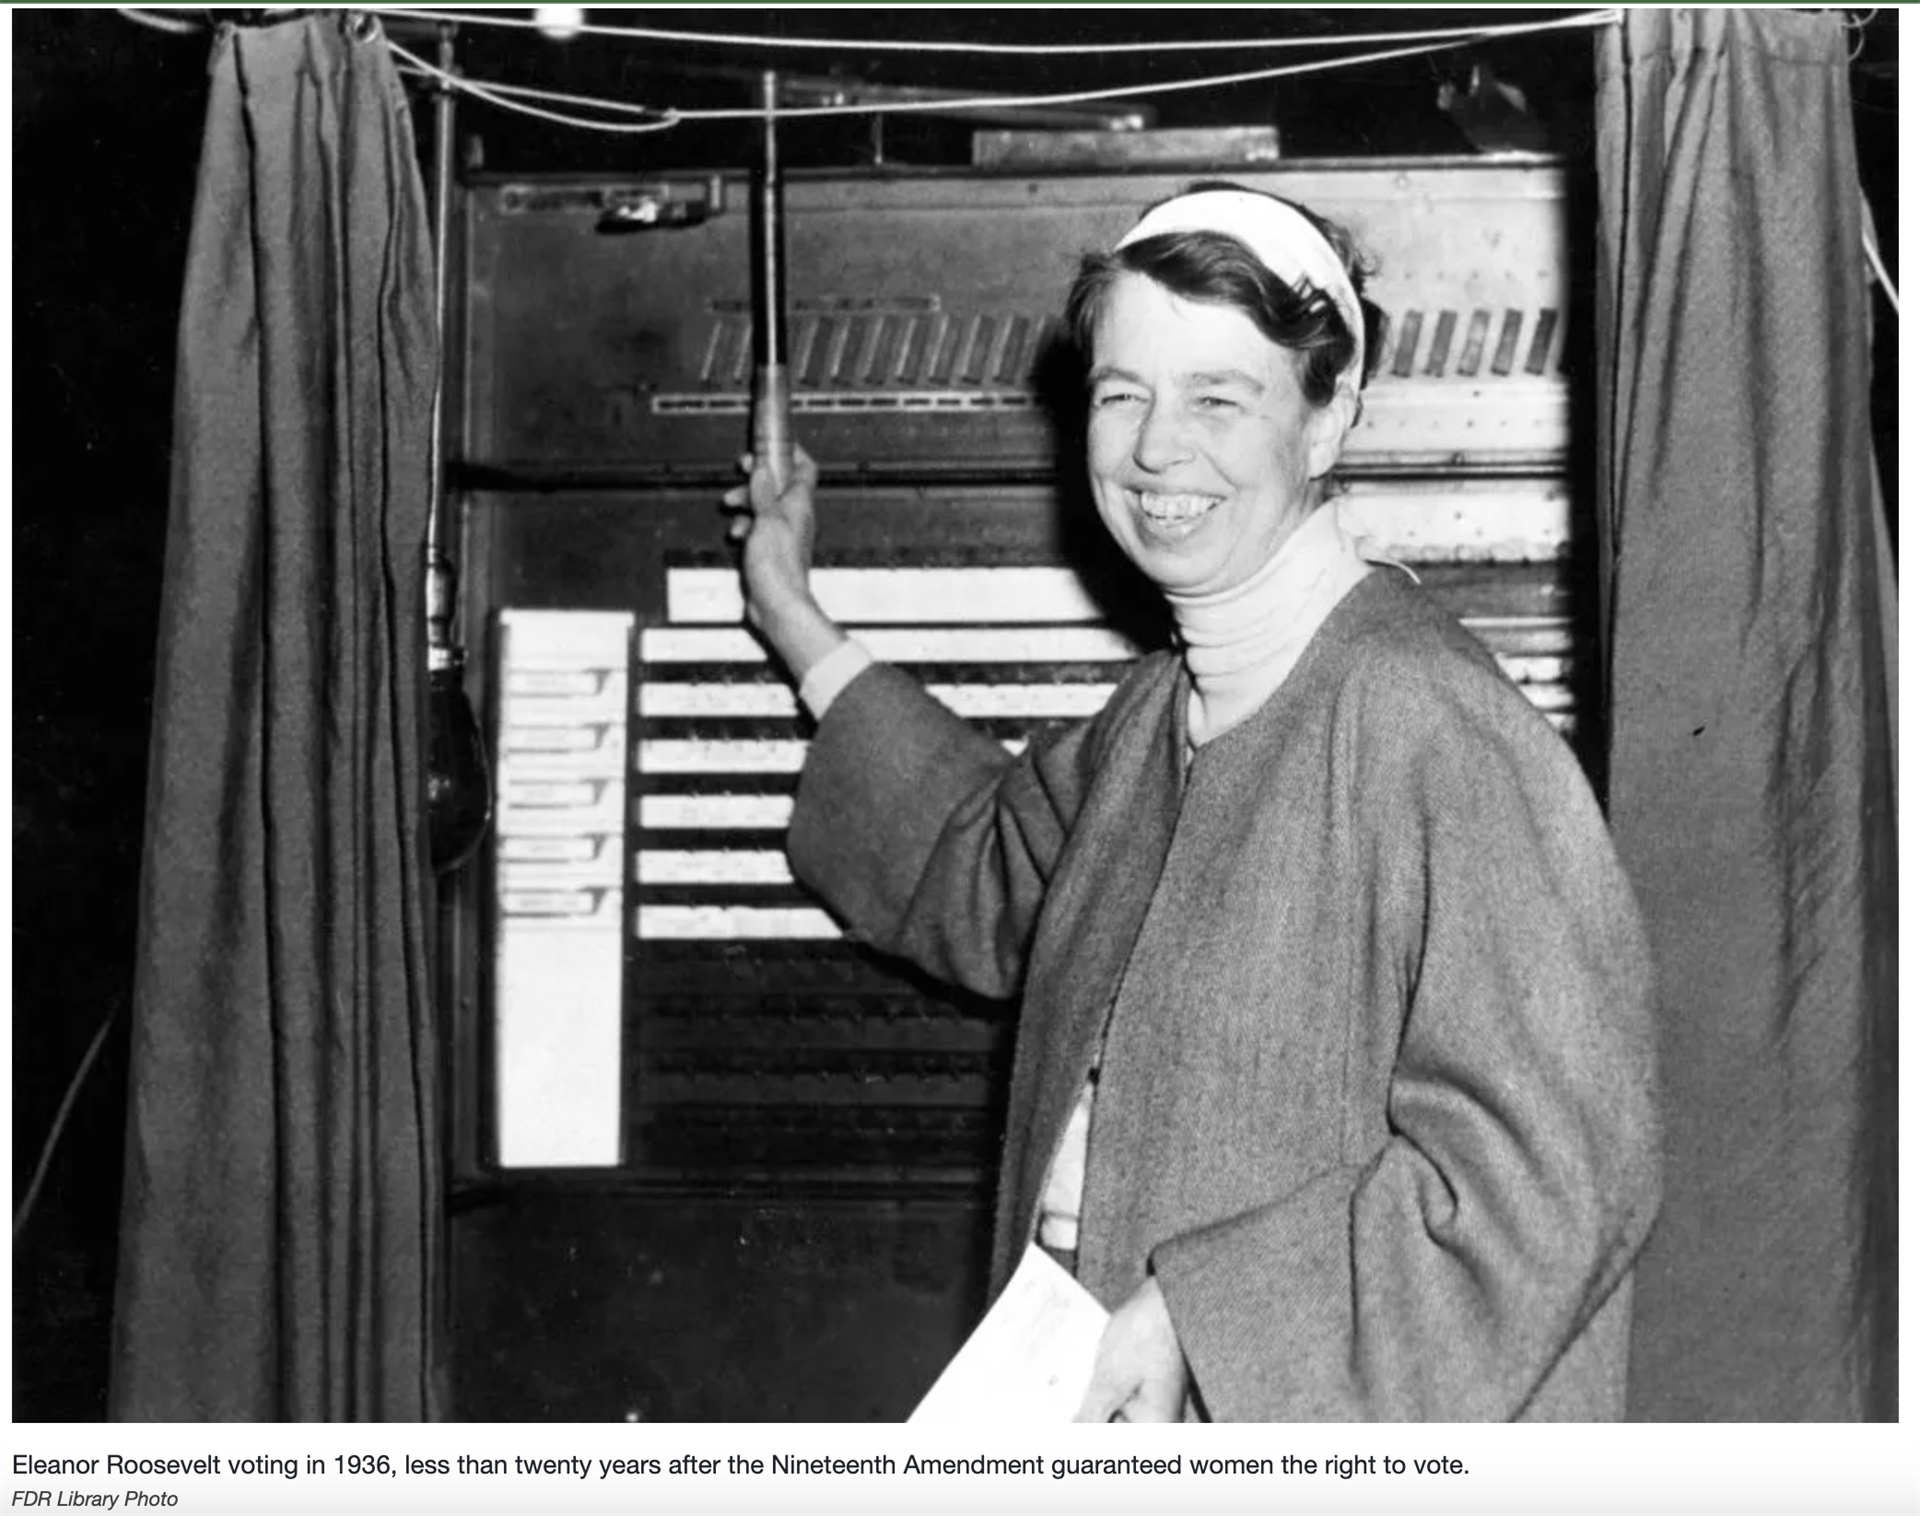 Eleanor Roosevelt standing in front of a voting booth in 1936